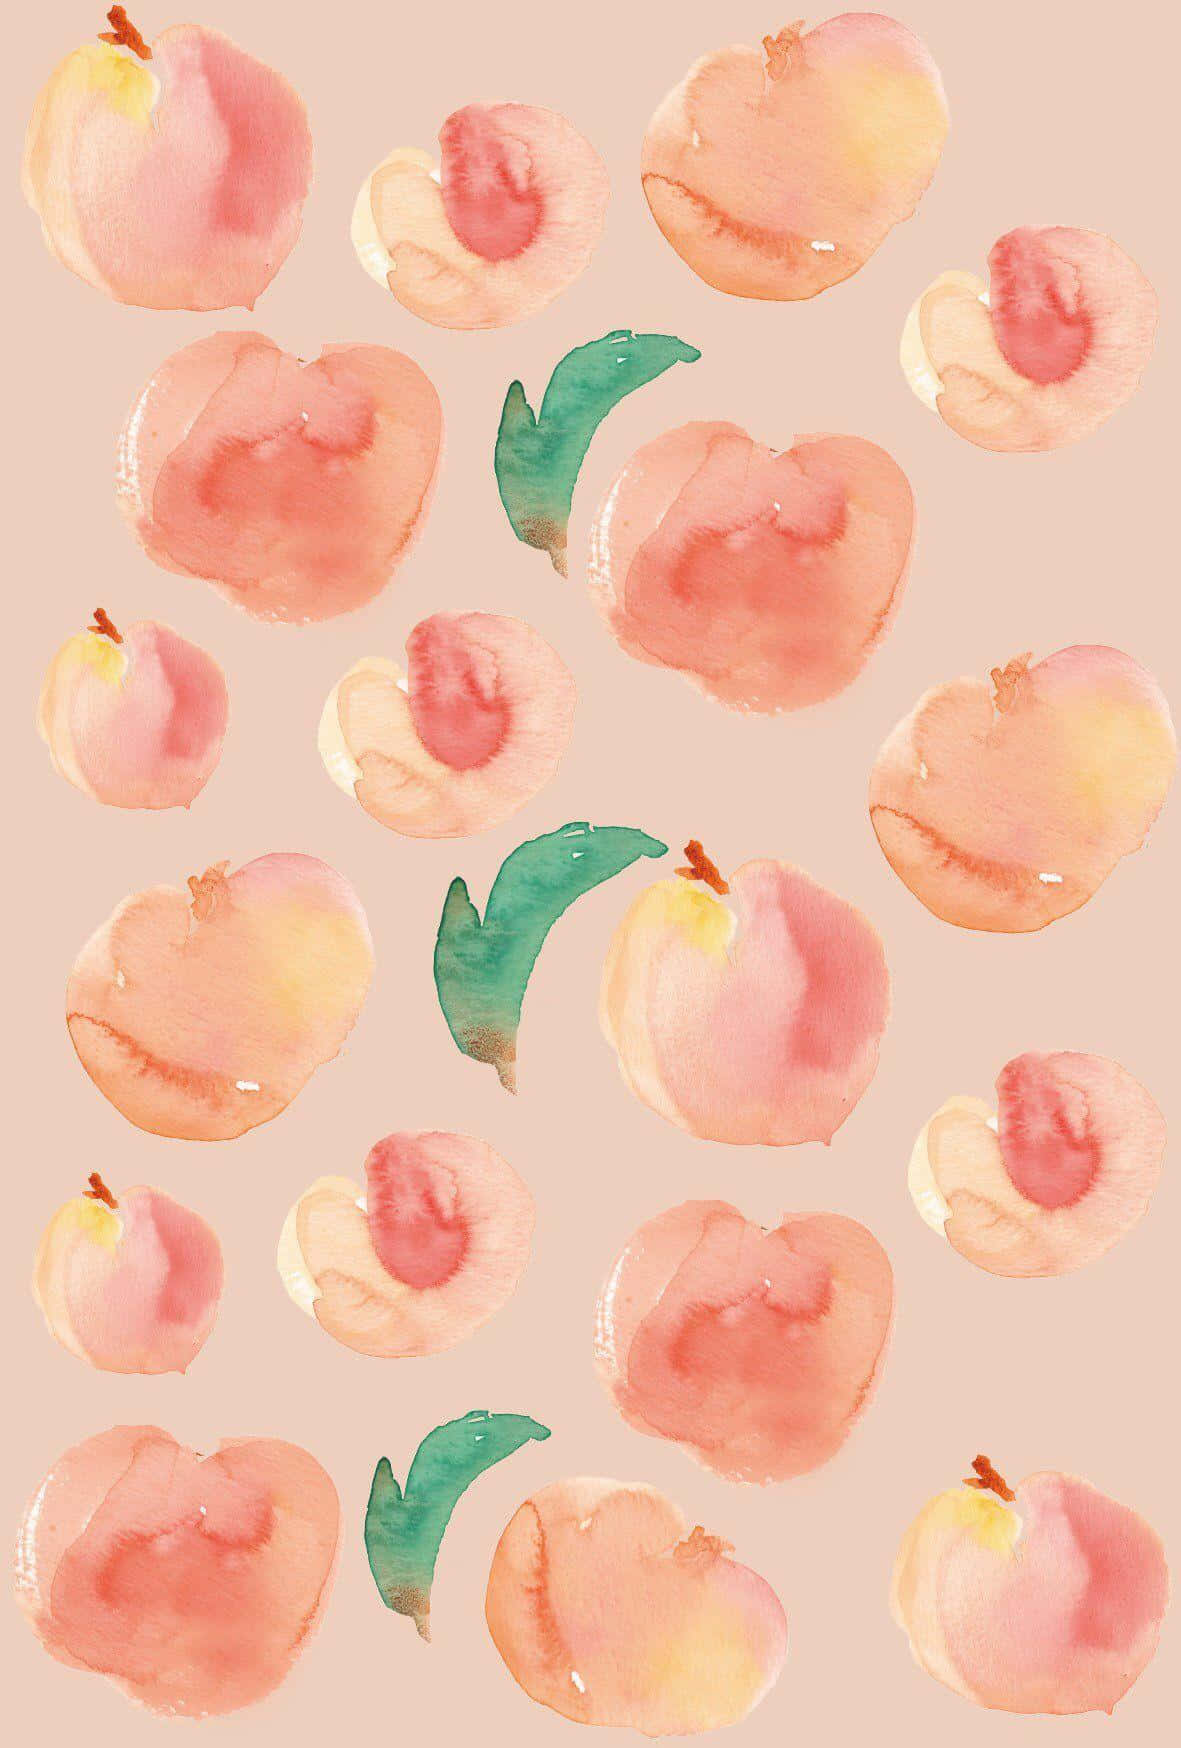 Caption: Soothing Peach Aesthetic Background